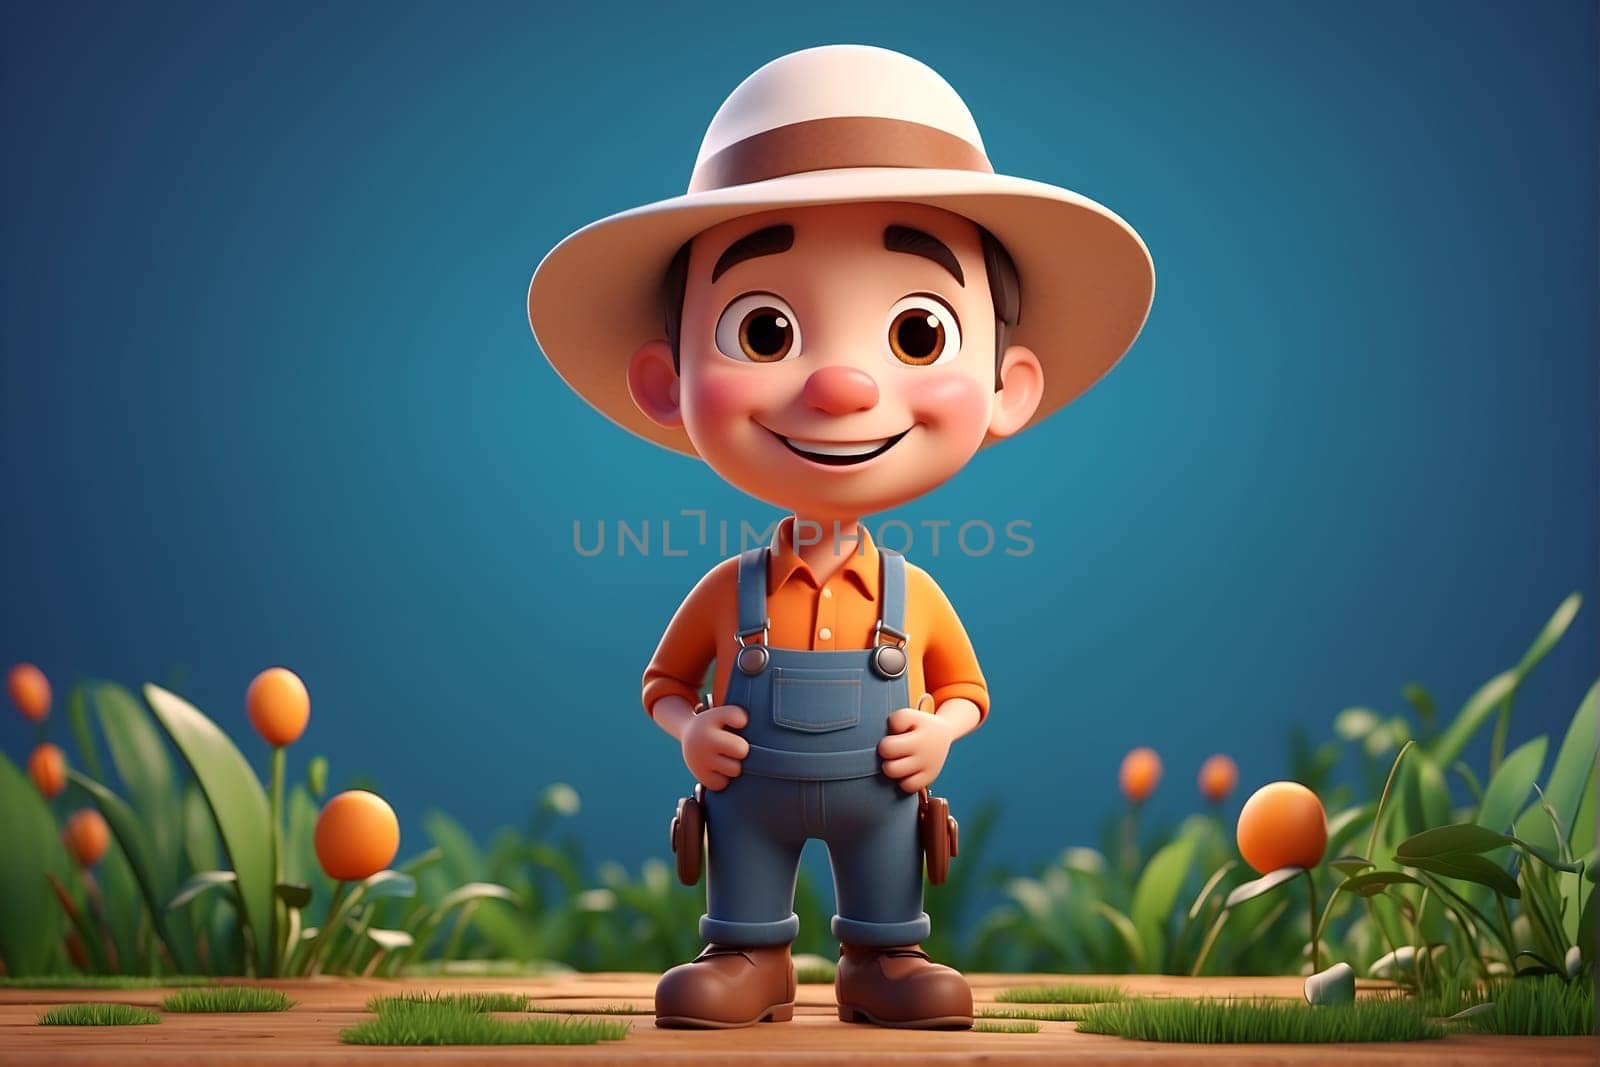 This delightful image features a charming cartoon character donning a hat and overalls, embodying the essence of wholesome animated charm.